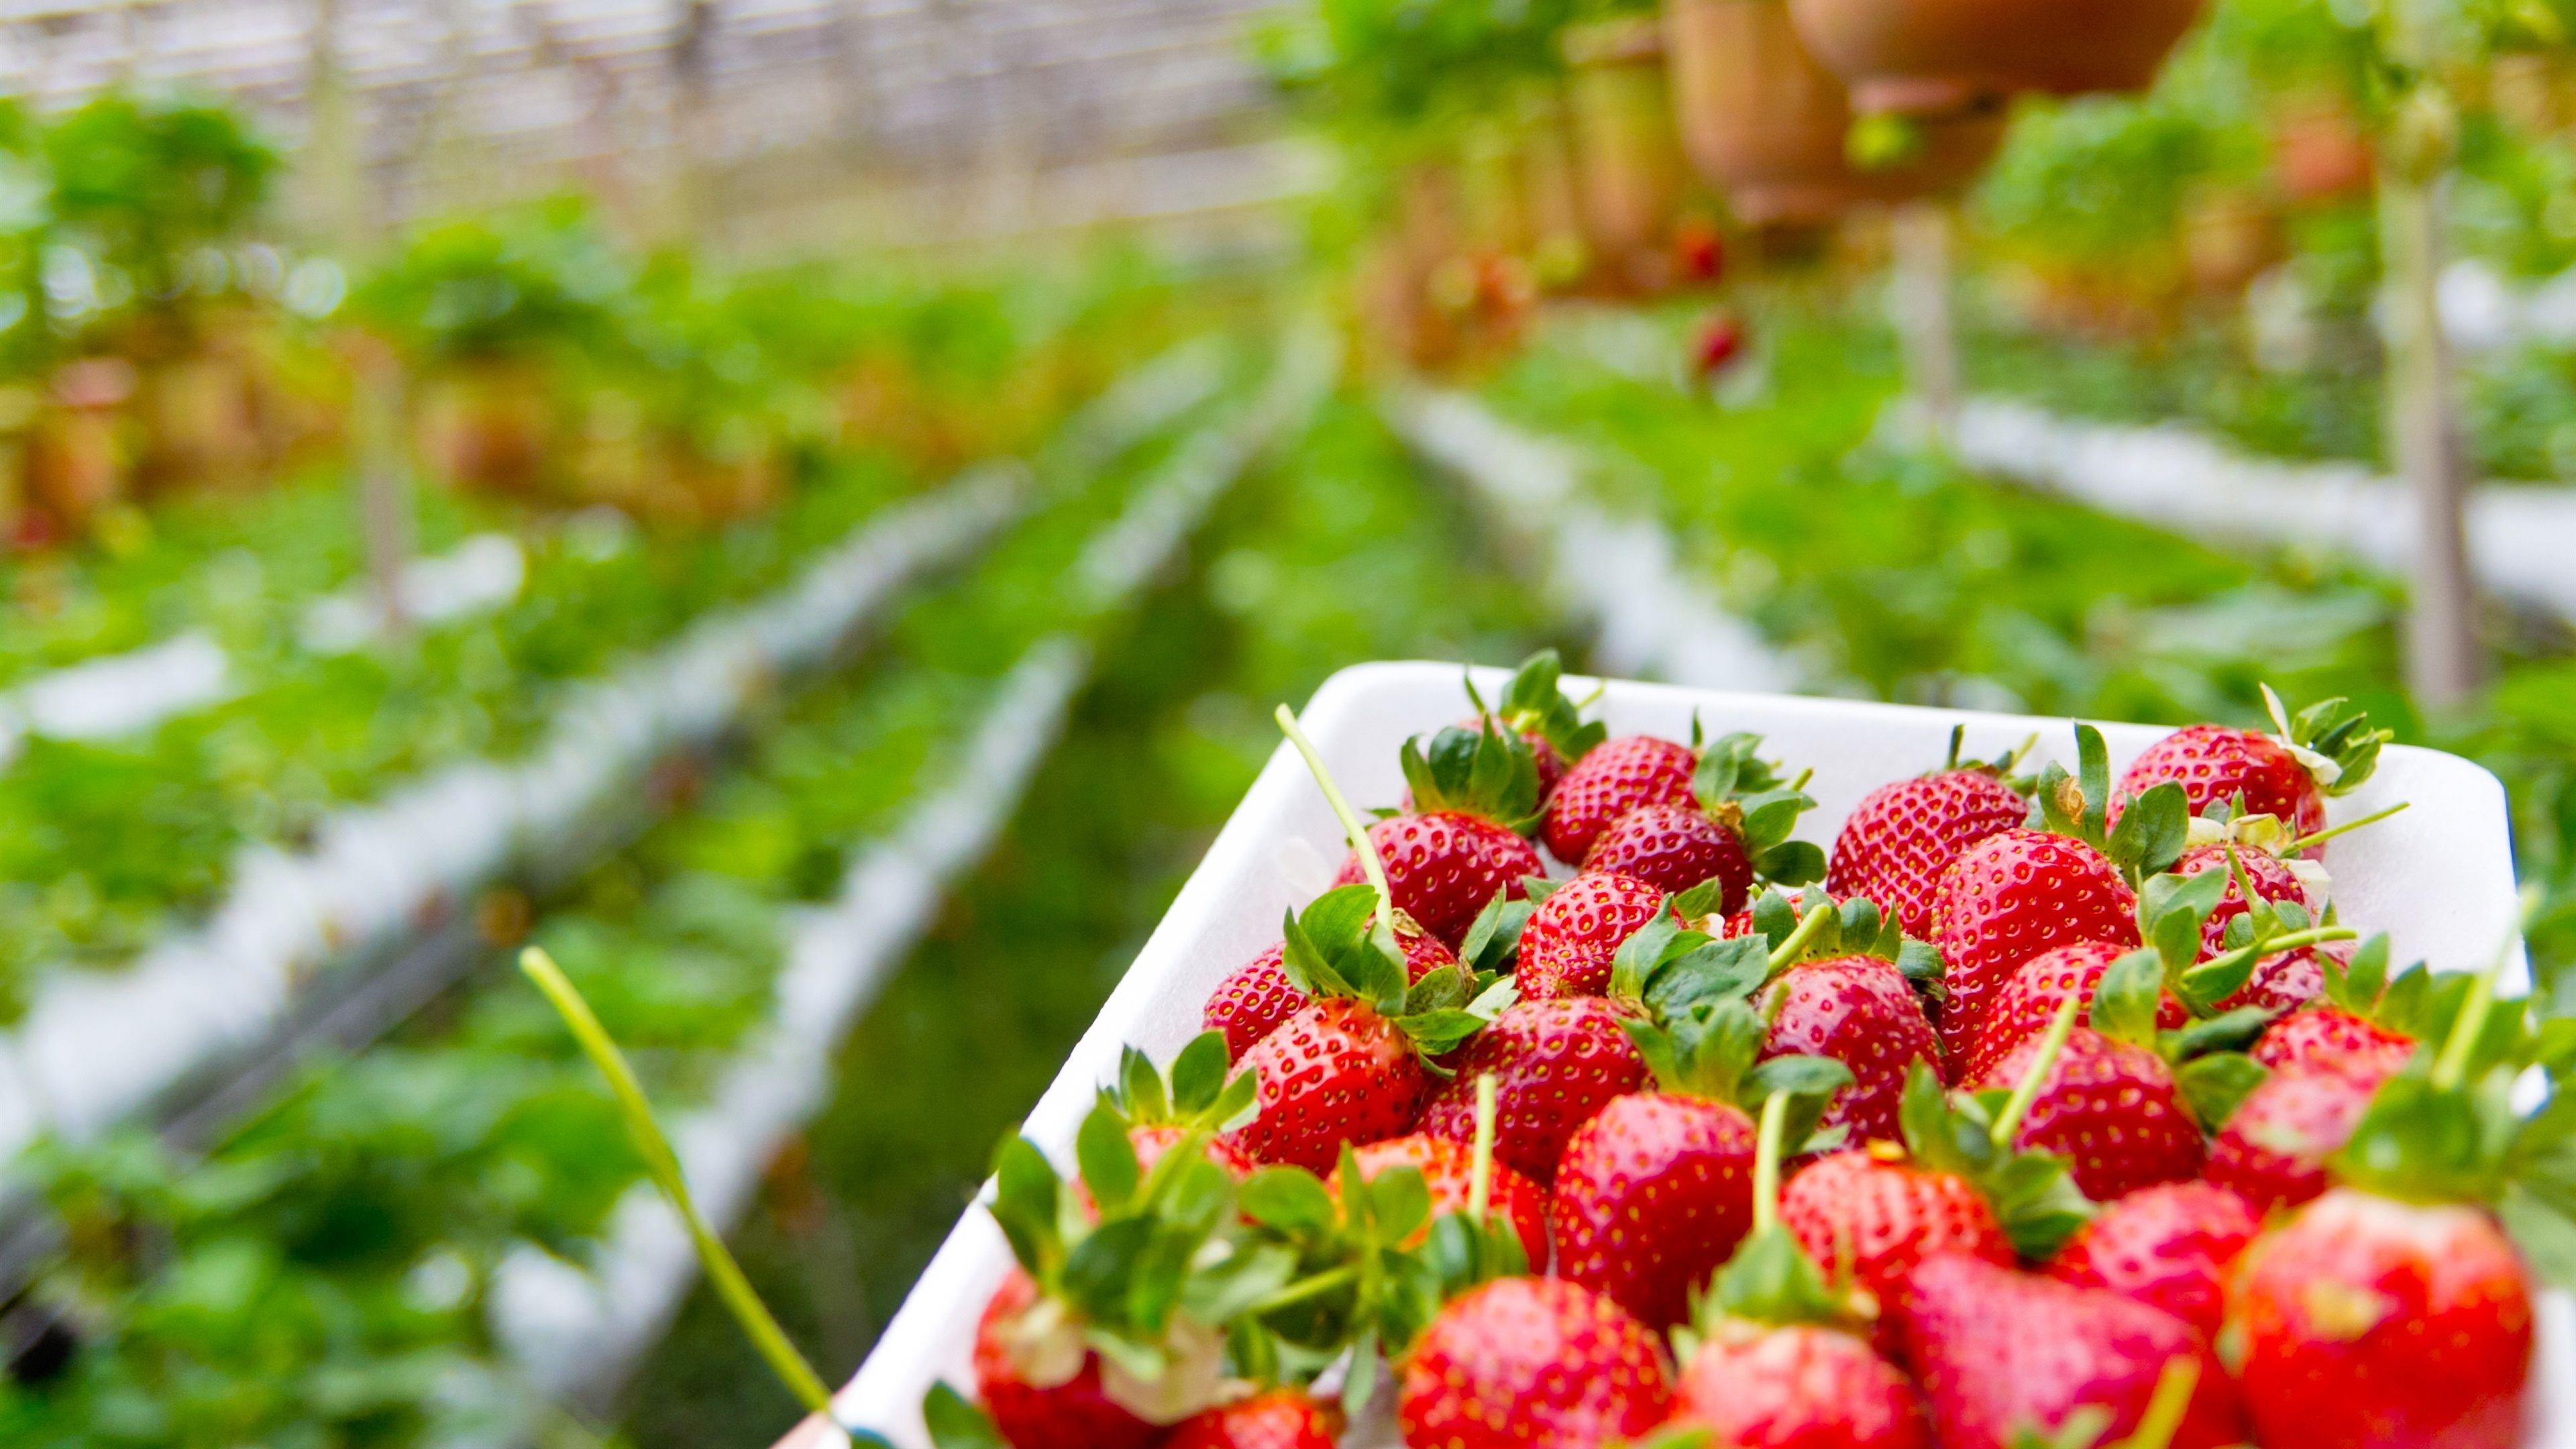 Wallpaper Strawberry planting garden 3840x2160 UHD 4K Picture, Image